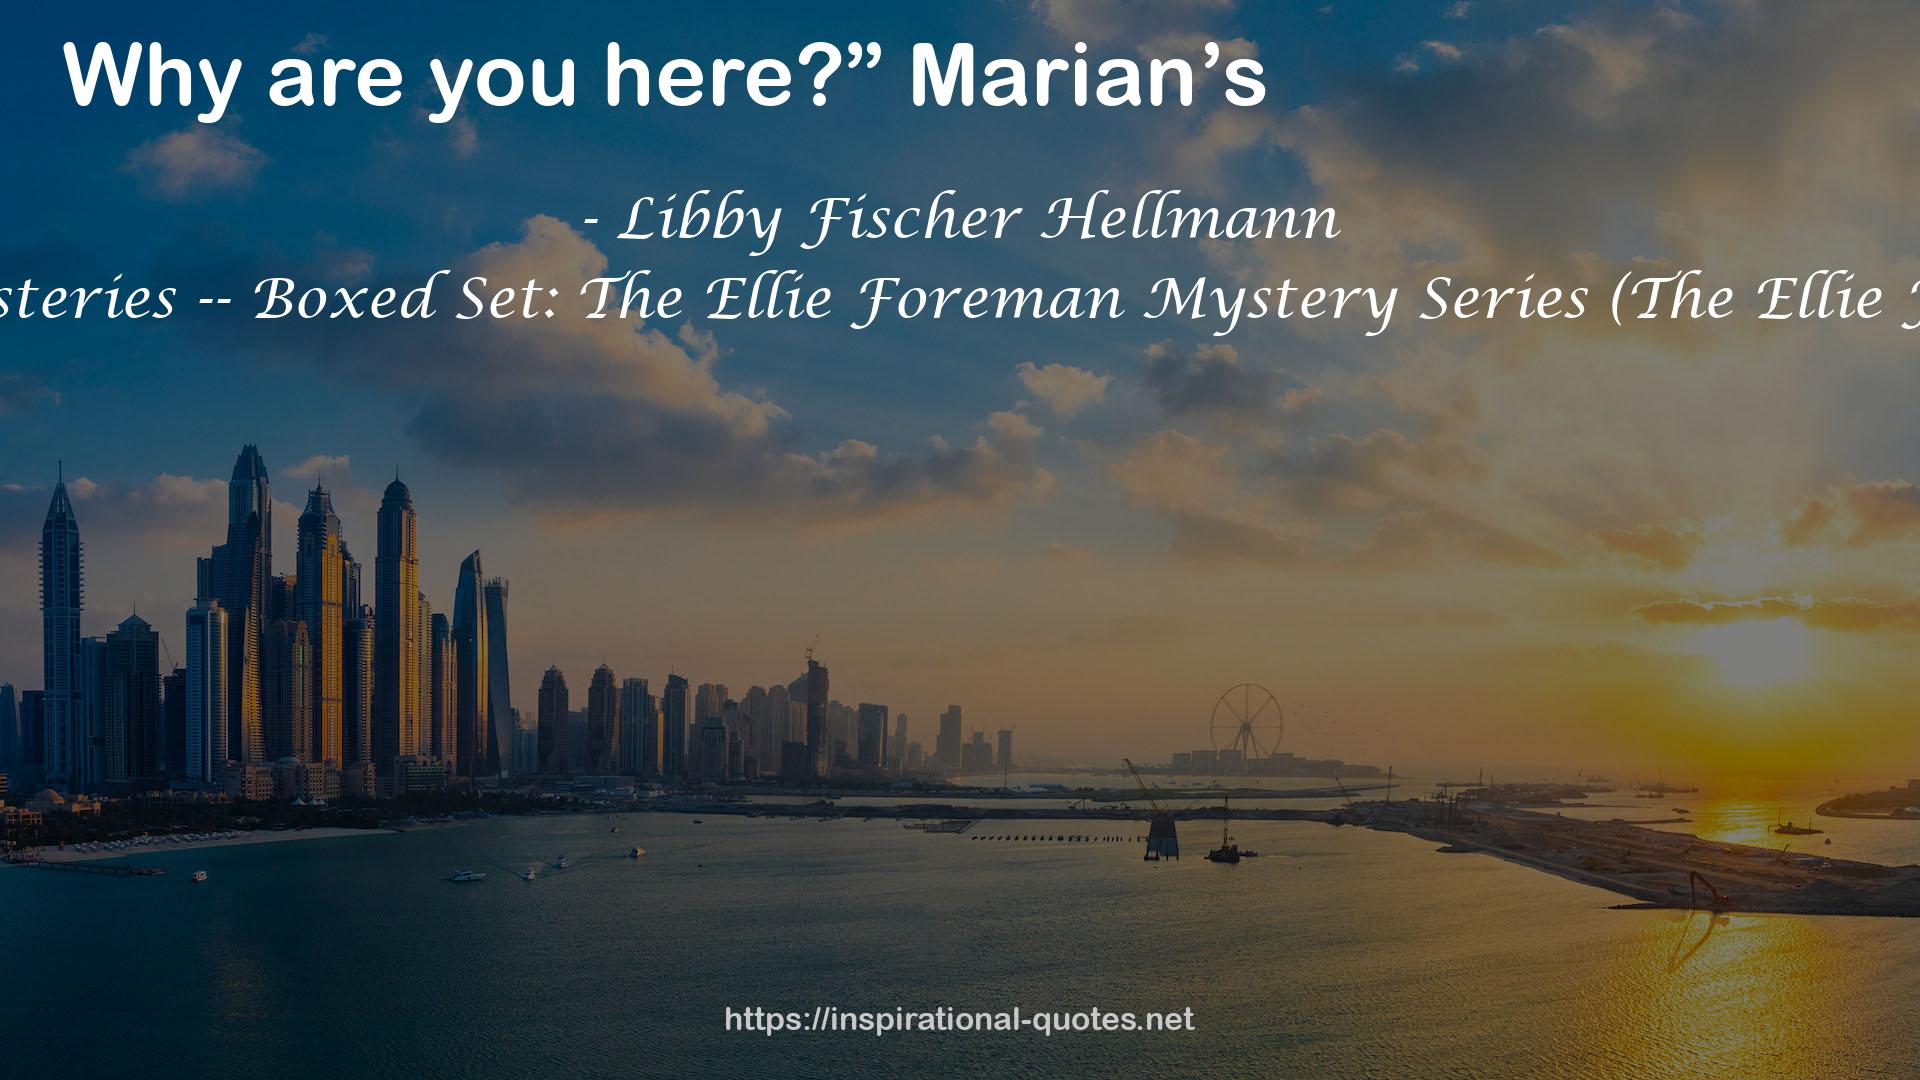 The Ellie Foreman Mysteries -- Boxed Set: The Ellie Foreman Mystery Series (The Ellie Foreman Mysteries 1-4) QUOTES